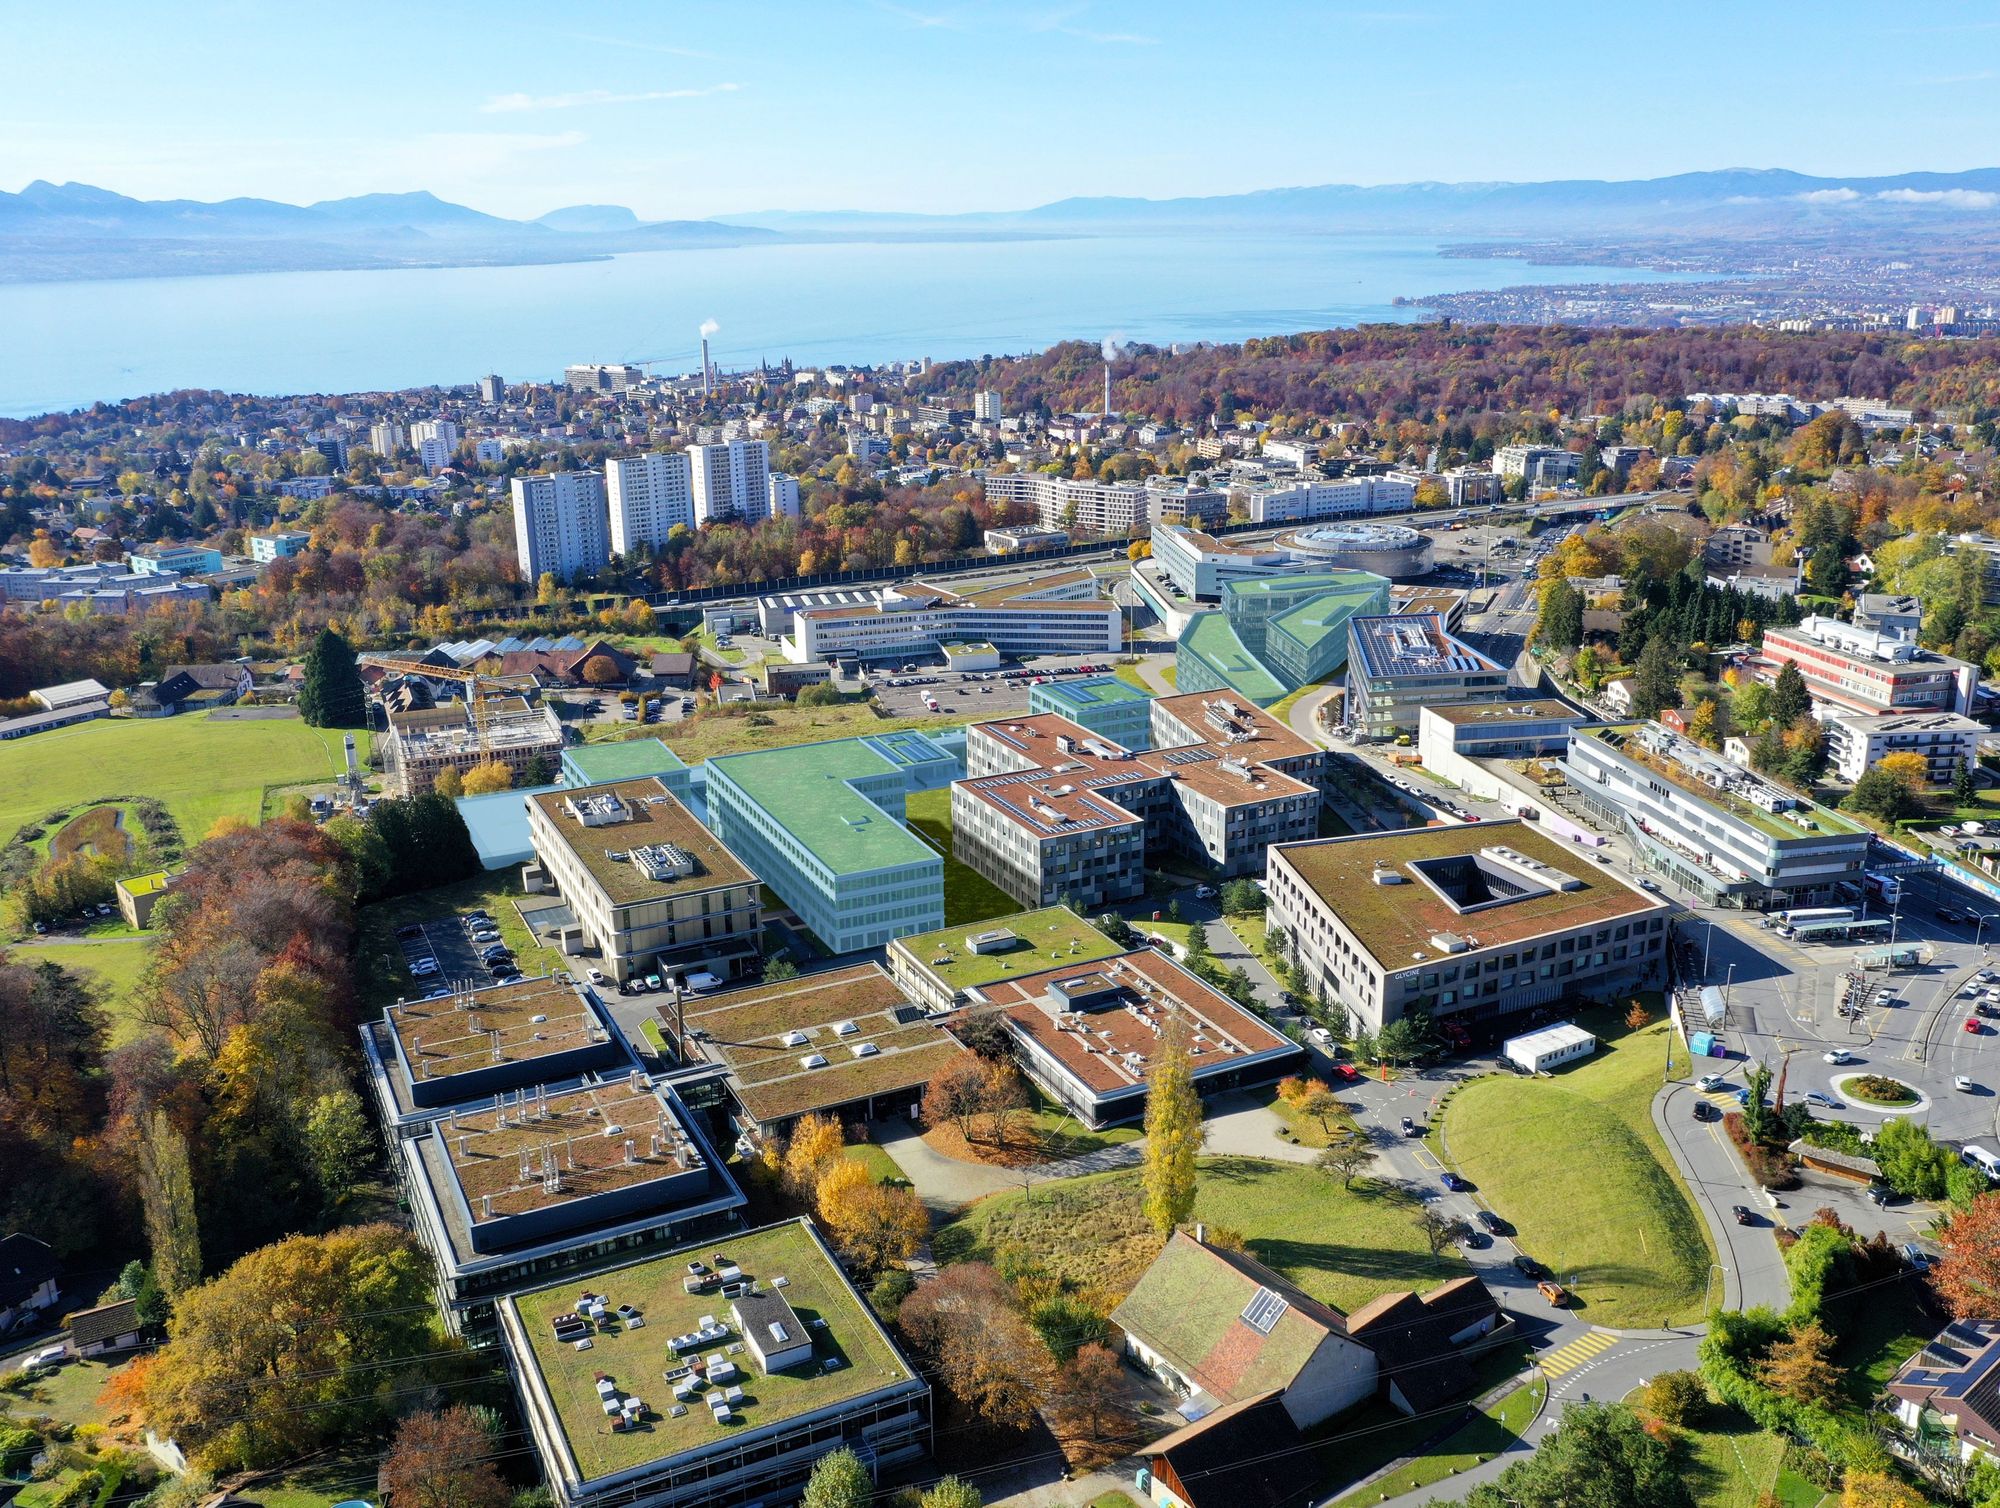 At the heart of the canton of Vaud, the Biopole Campus offers a stunning view of the lake and one of the most vibrant MedTech and BioTech ecosystems in the world.